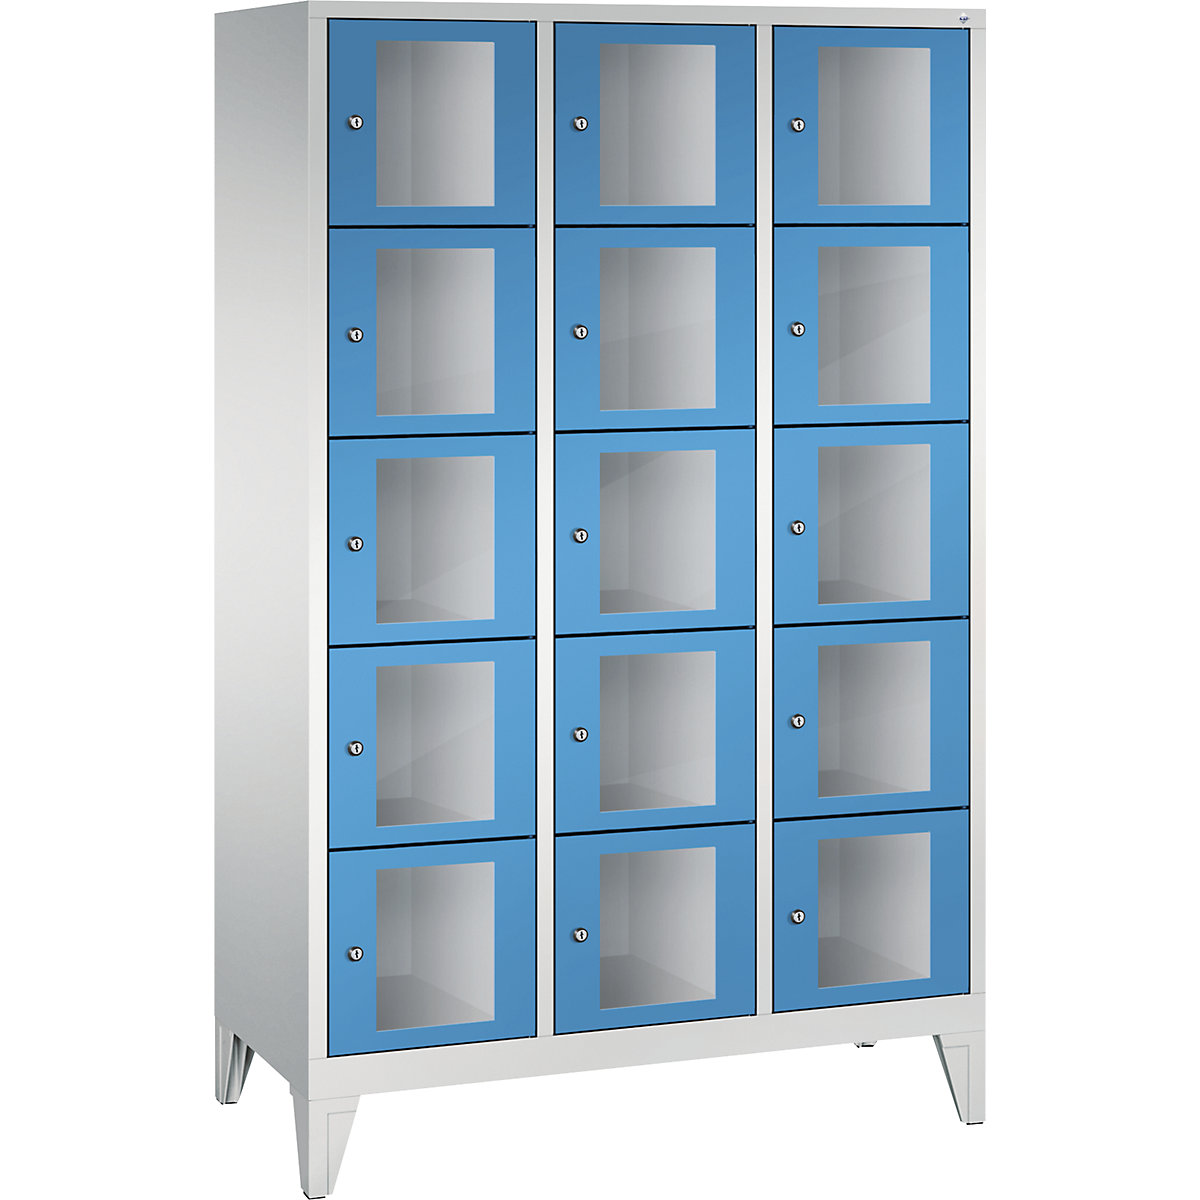 CLASSIC locker unit, compartment height 295 mm, with feet – C+P, 15 compartments, width 1200 mm, light blue door